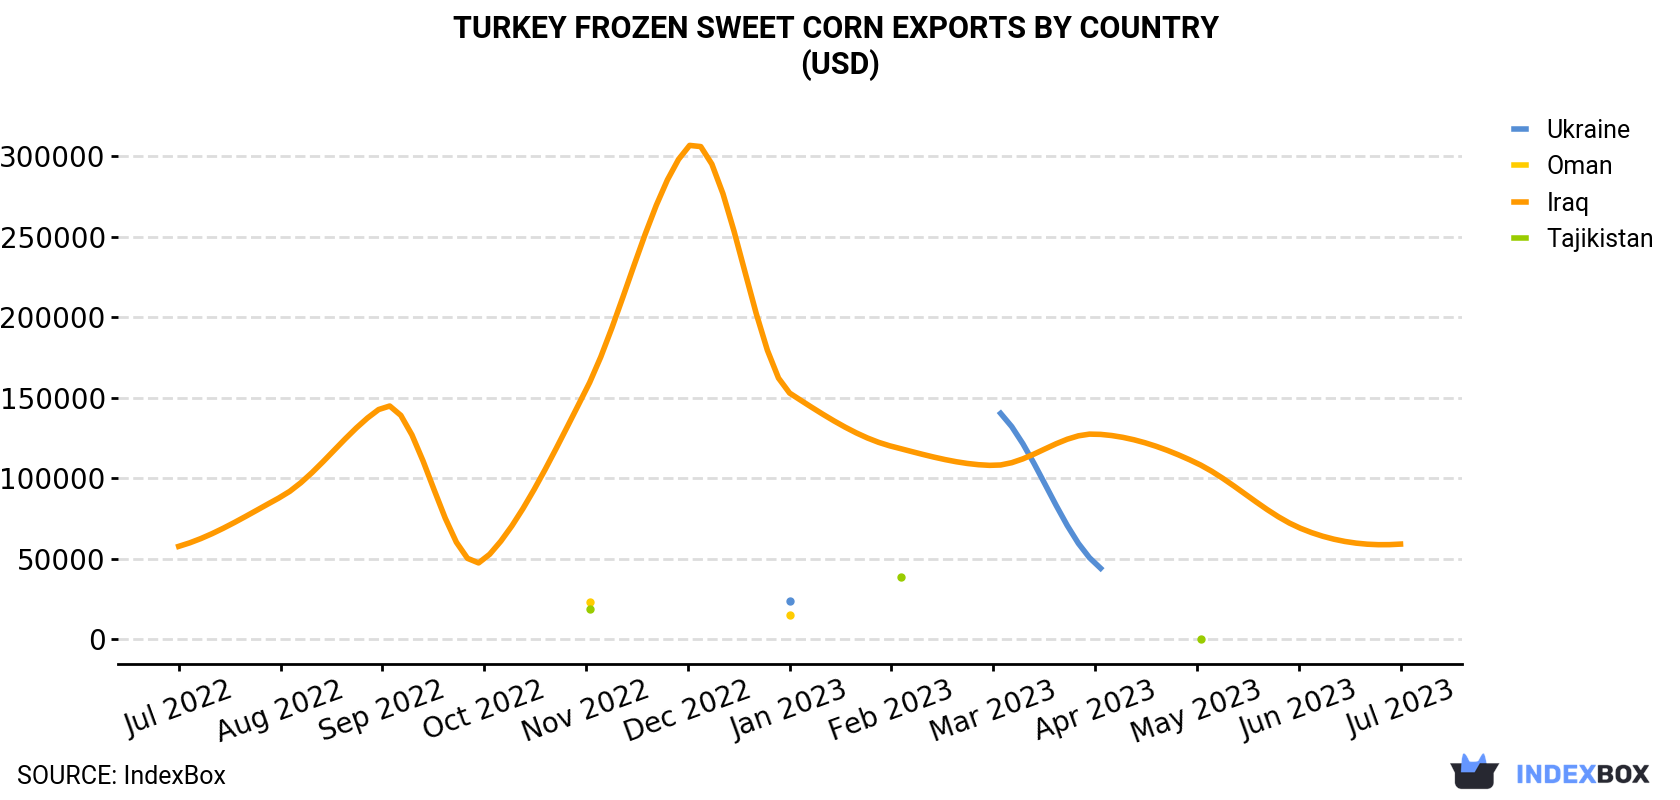 Turkey Frozen Sweet Corn Exports By Country (USD)